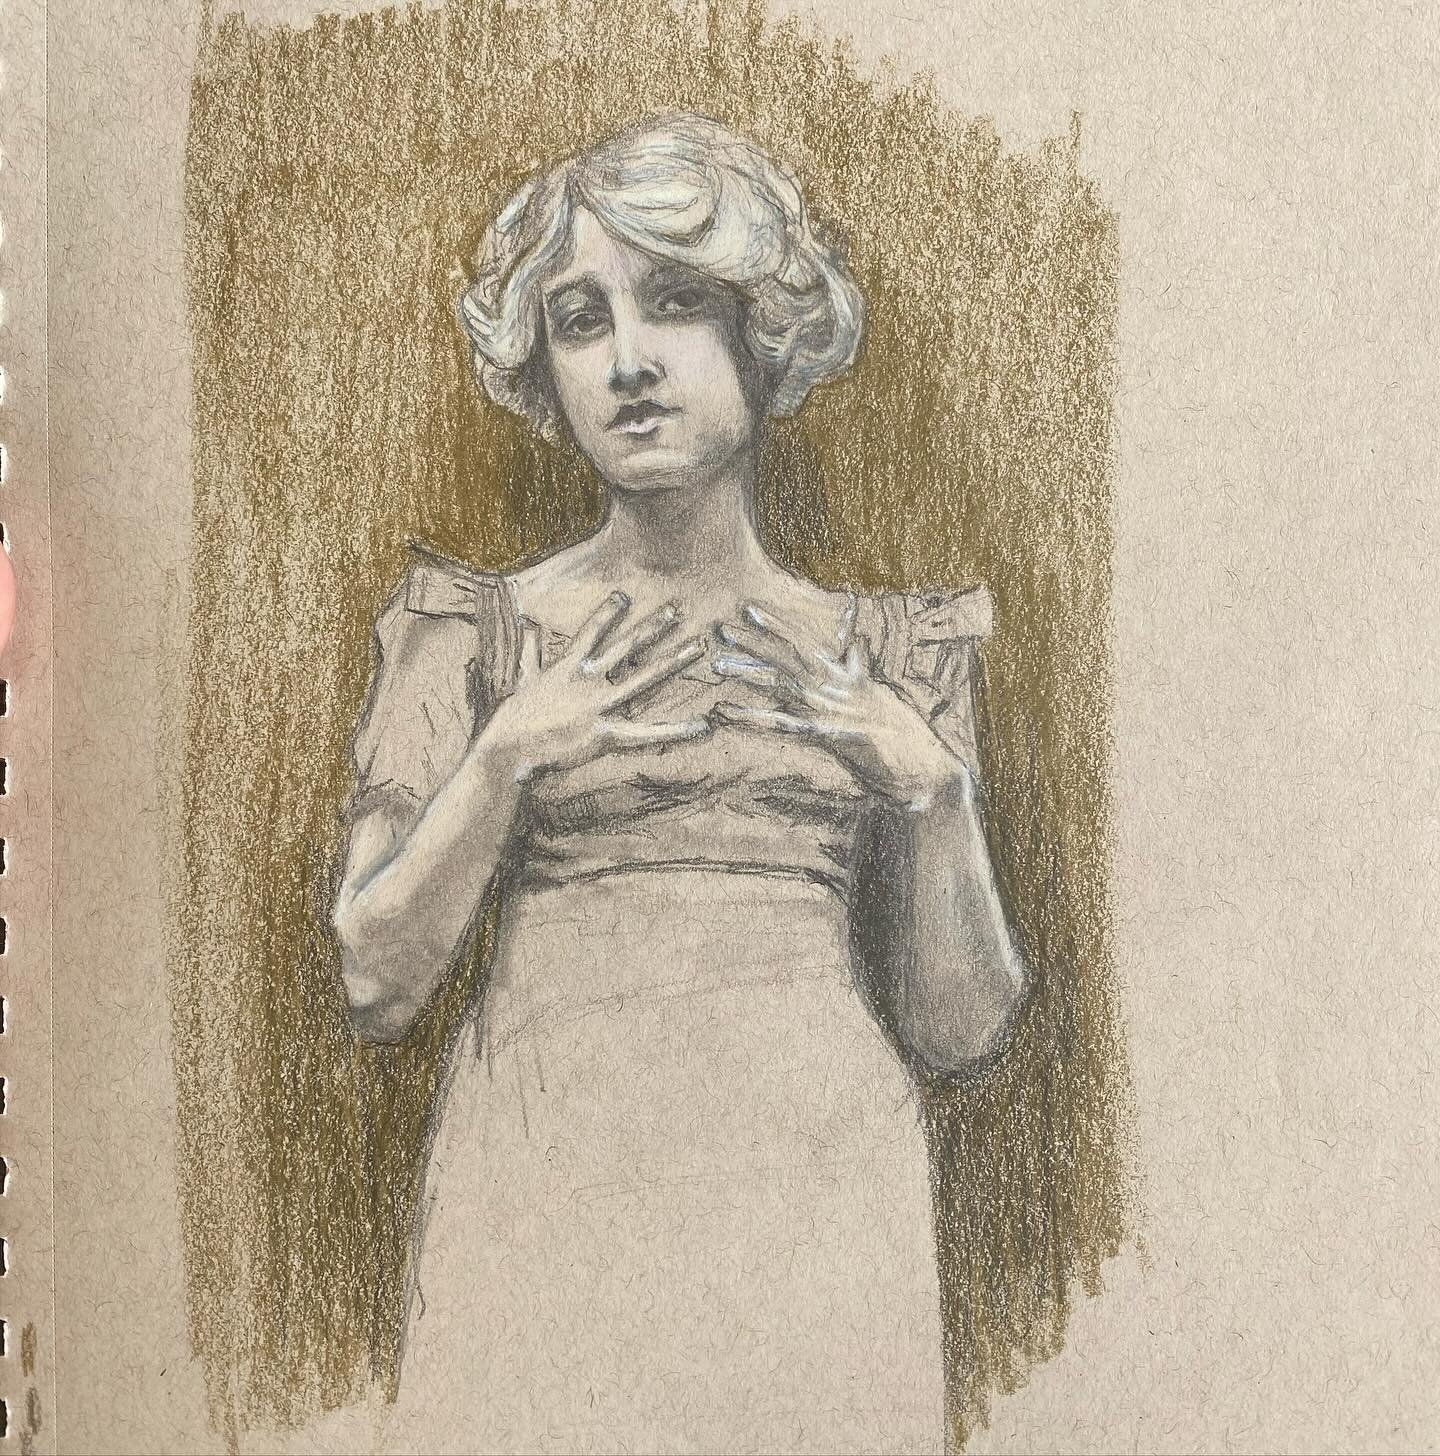 Study/sketch with pencils on tan toned paper. 6x10&rdquo;. I took advice passed on by a friend to start with the nose and had much better results with less correction. Trying to move away from using a grid to aid in drawing from life. Almost 2.5 hour